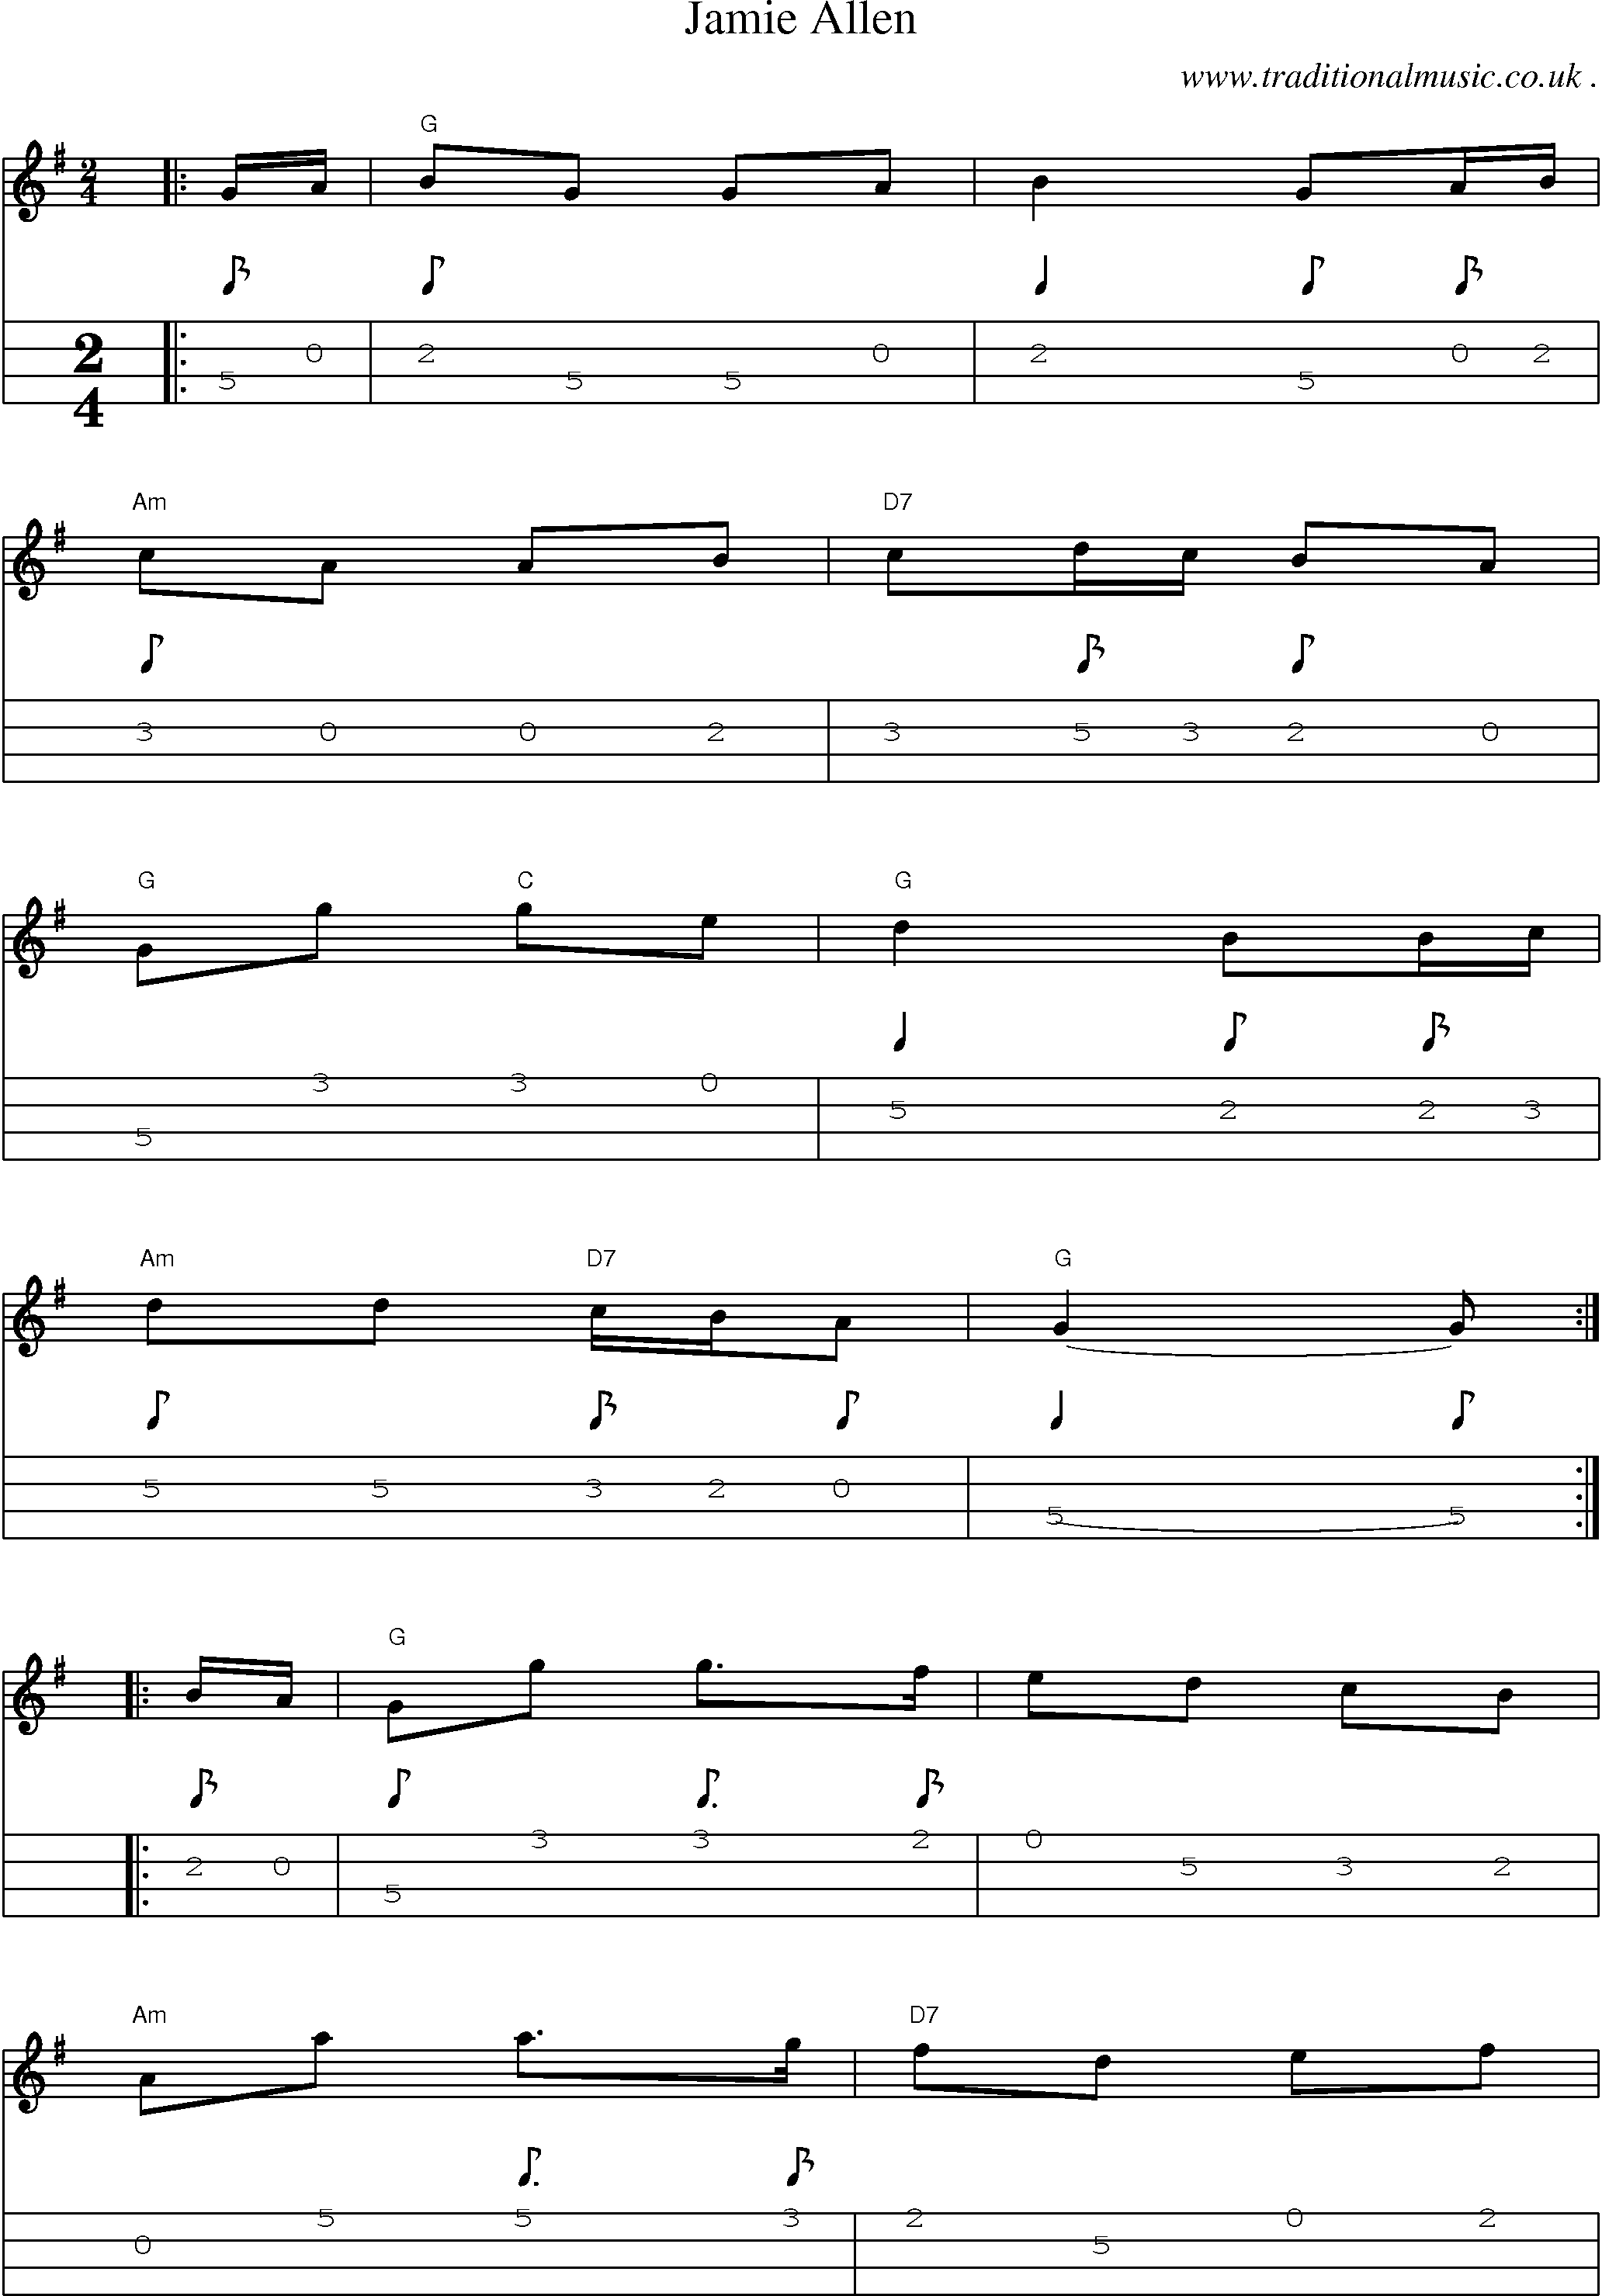 Music Score and Guitar Tabs for Jamie Allen